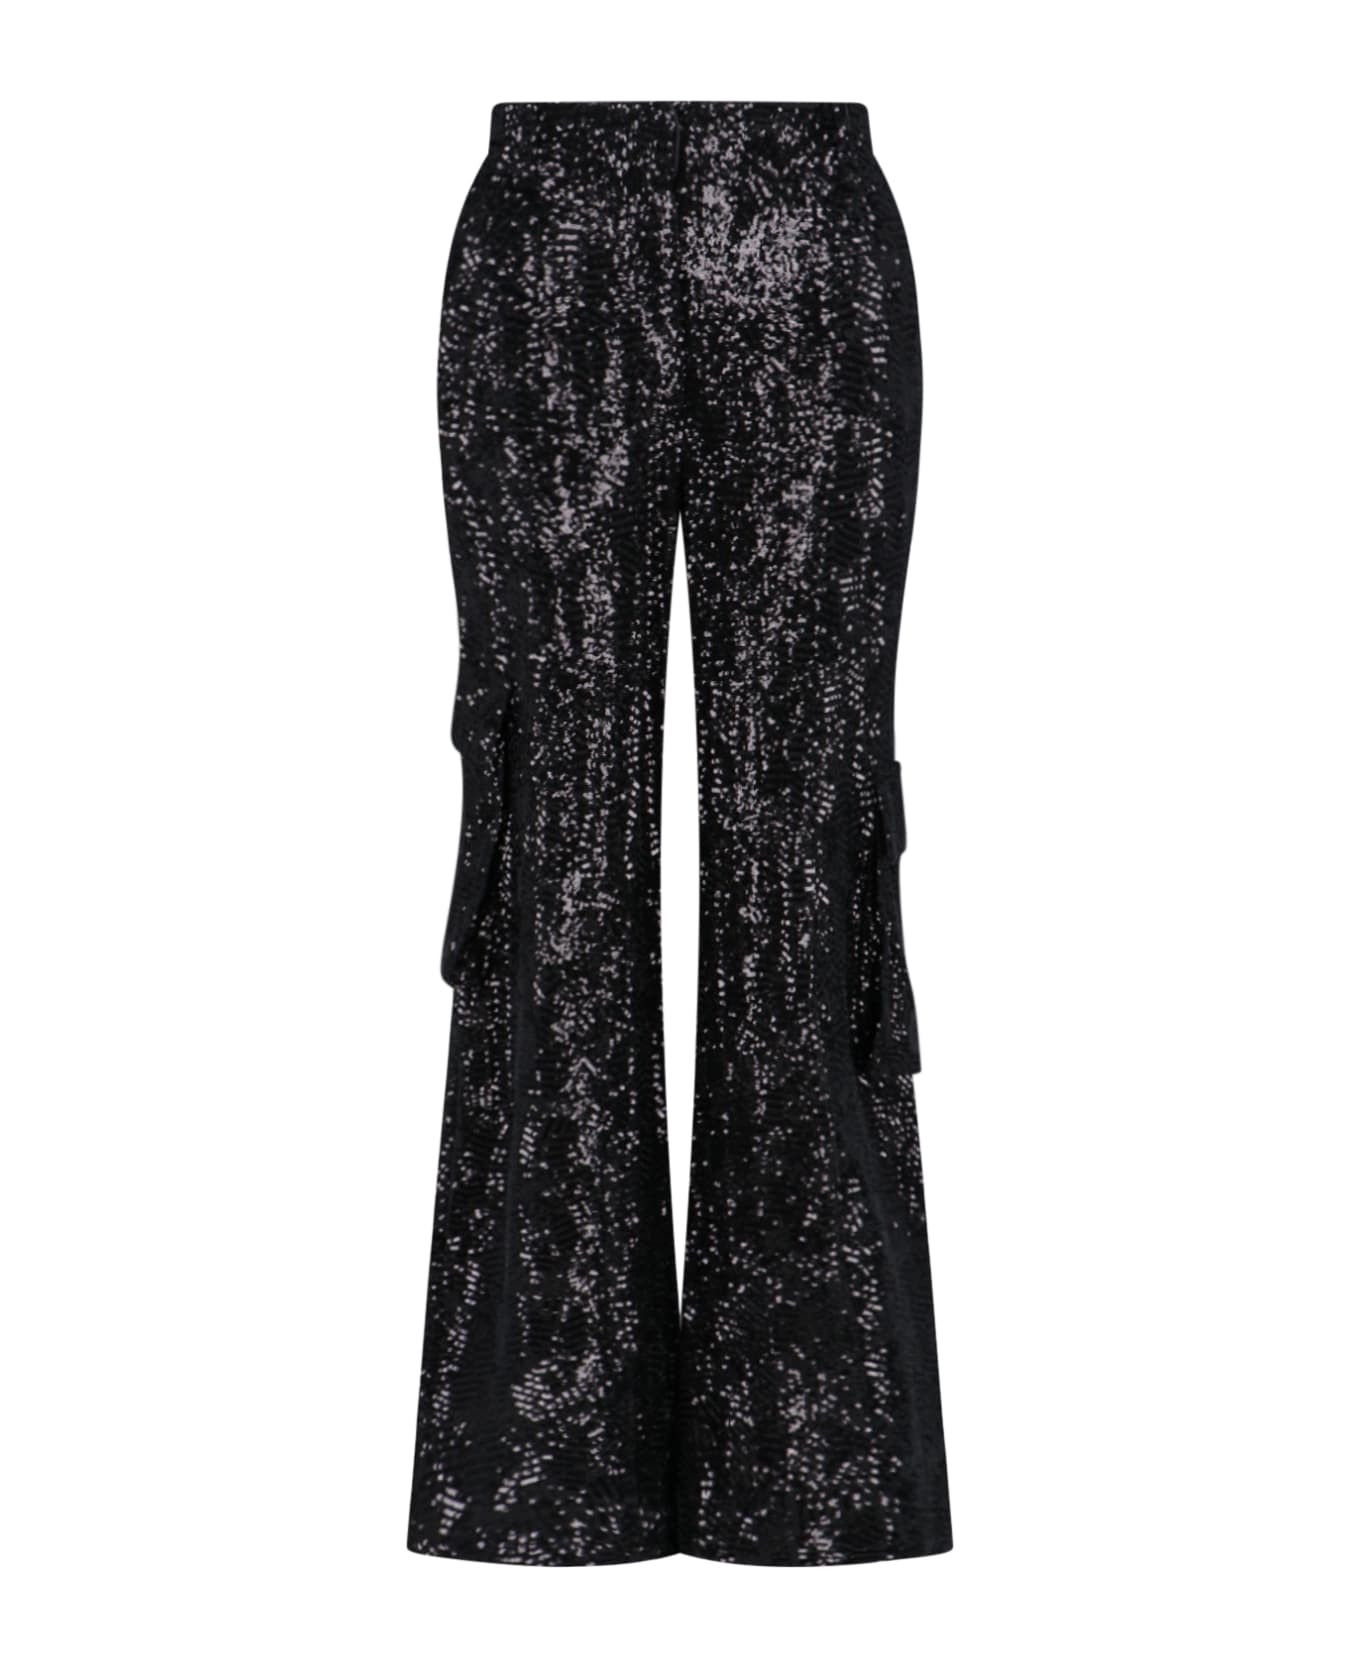 Rotate by Birger Christensen Sequin Cargo Trousers - Black  